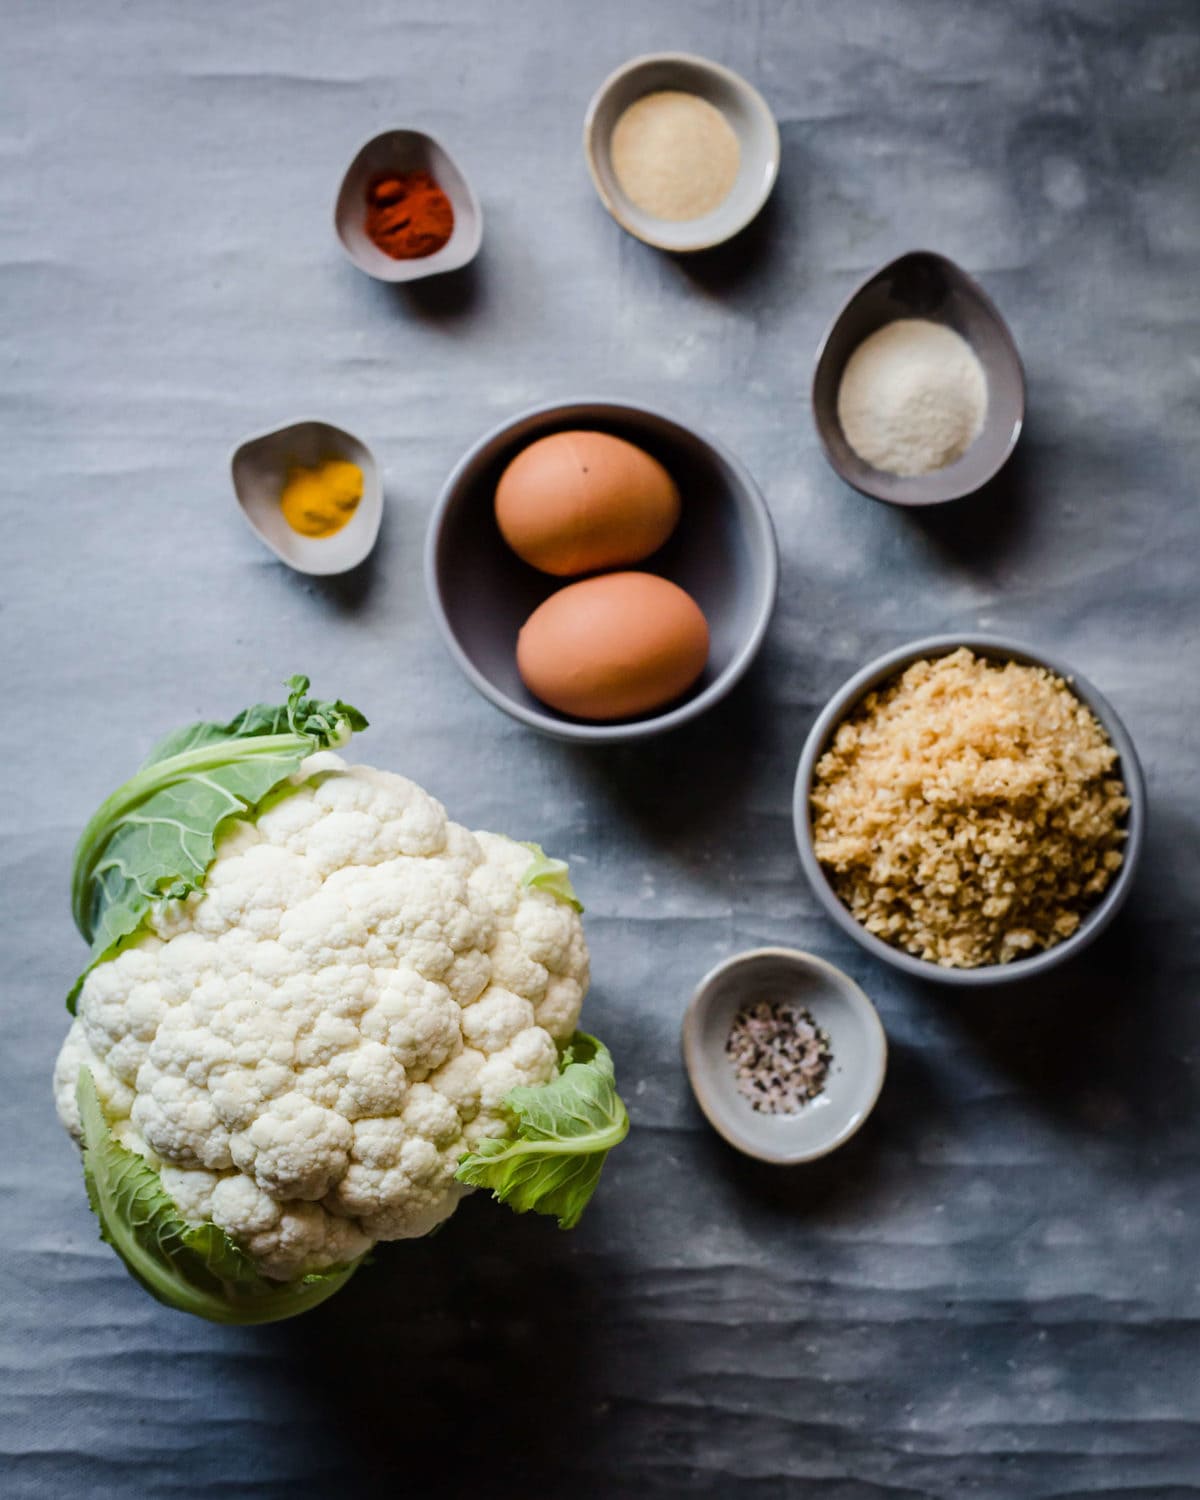 Ingredients laid out to make a chicken fried cauliflower - cauliflower, crushed pork rinds, seasonings, and eggs. 